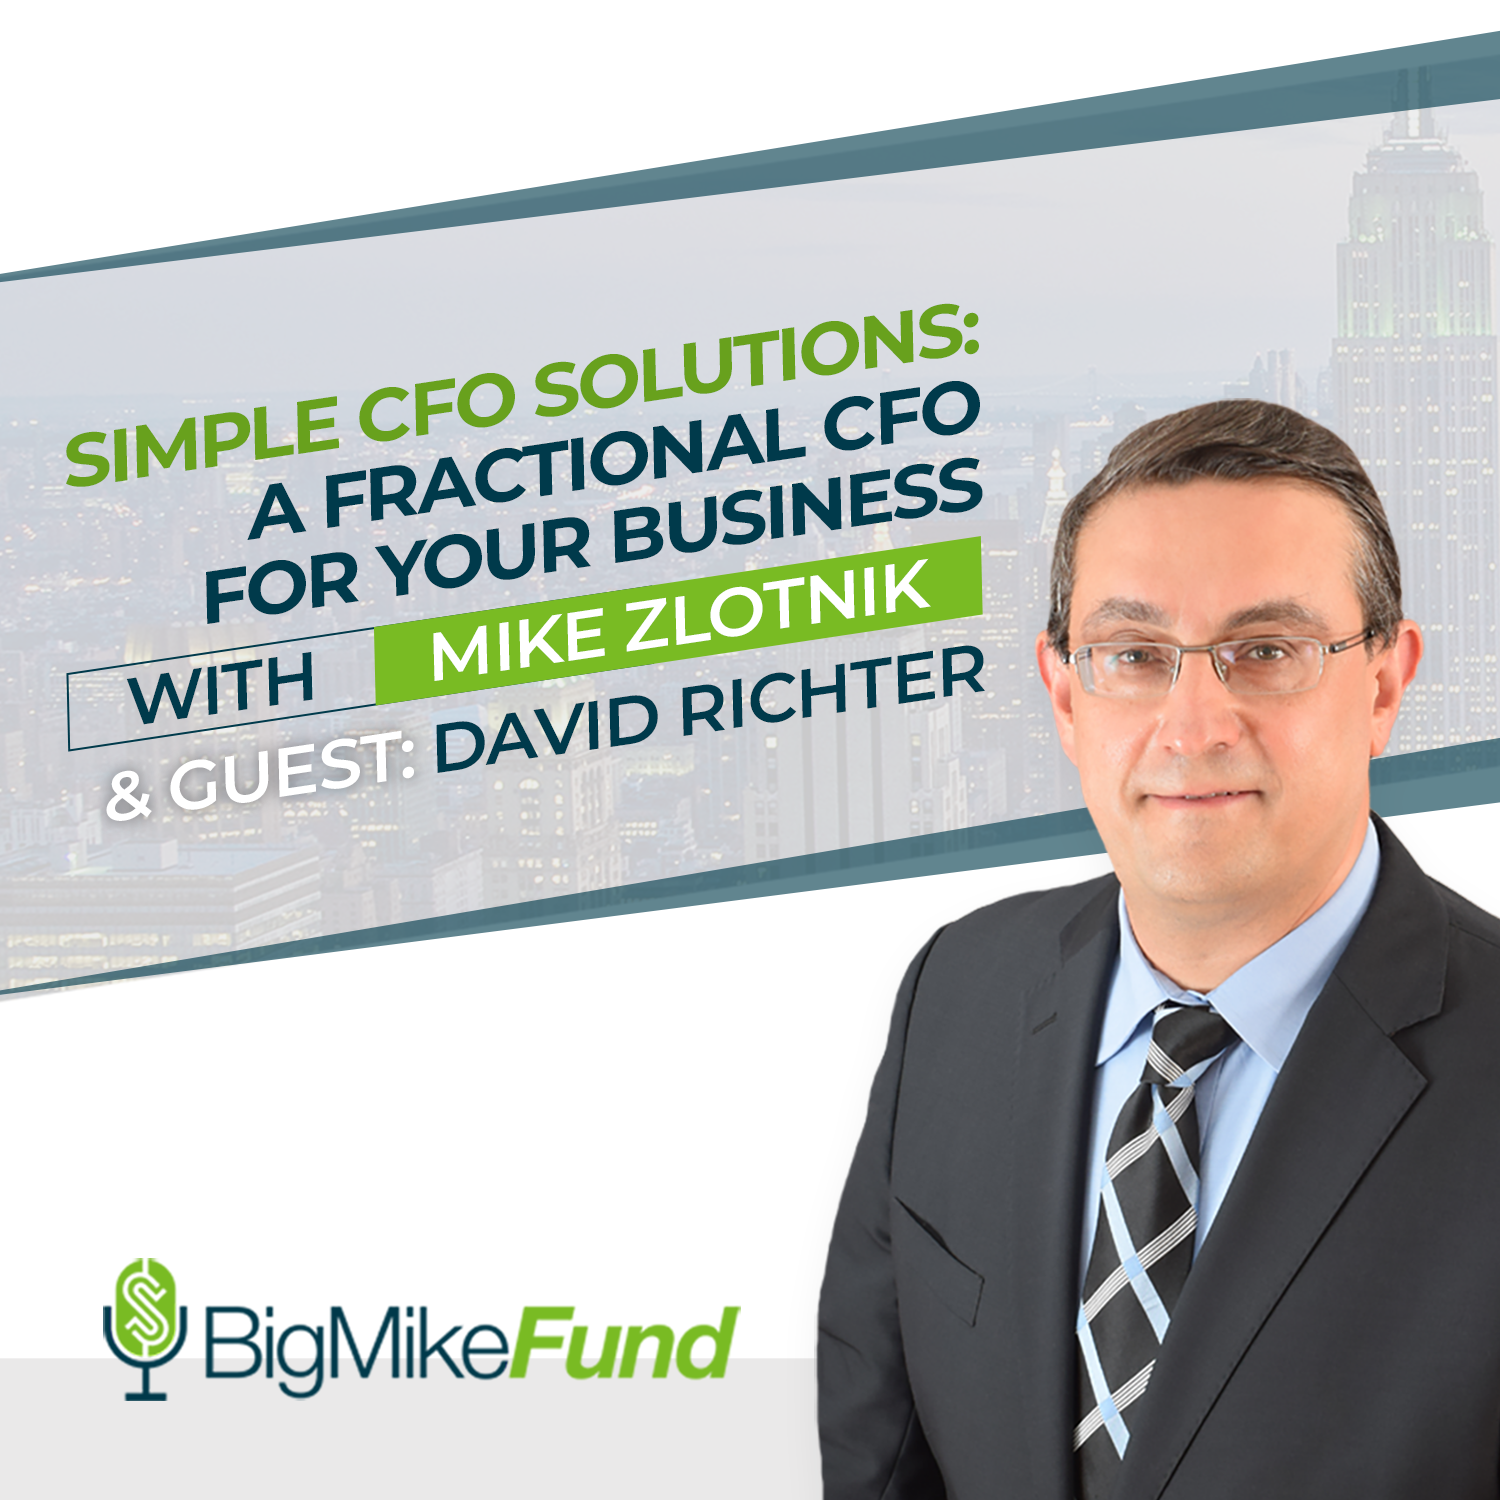 114: Simple CFO Solutions: A Fractional CFO for Your Business with David Richter